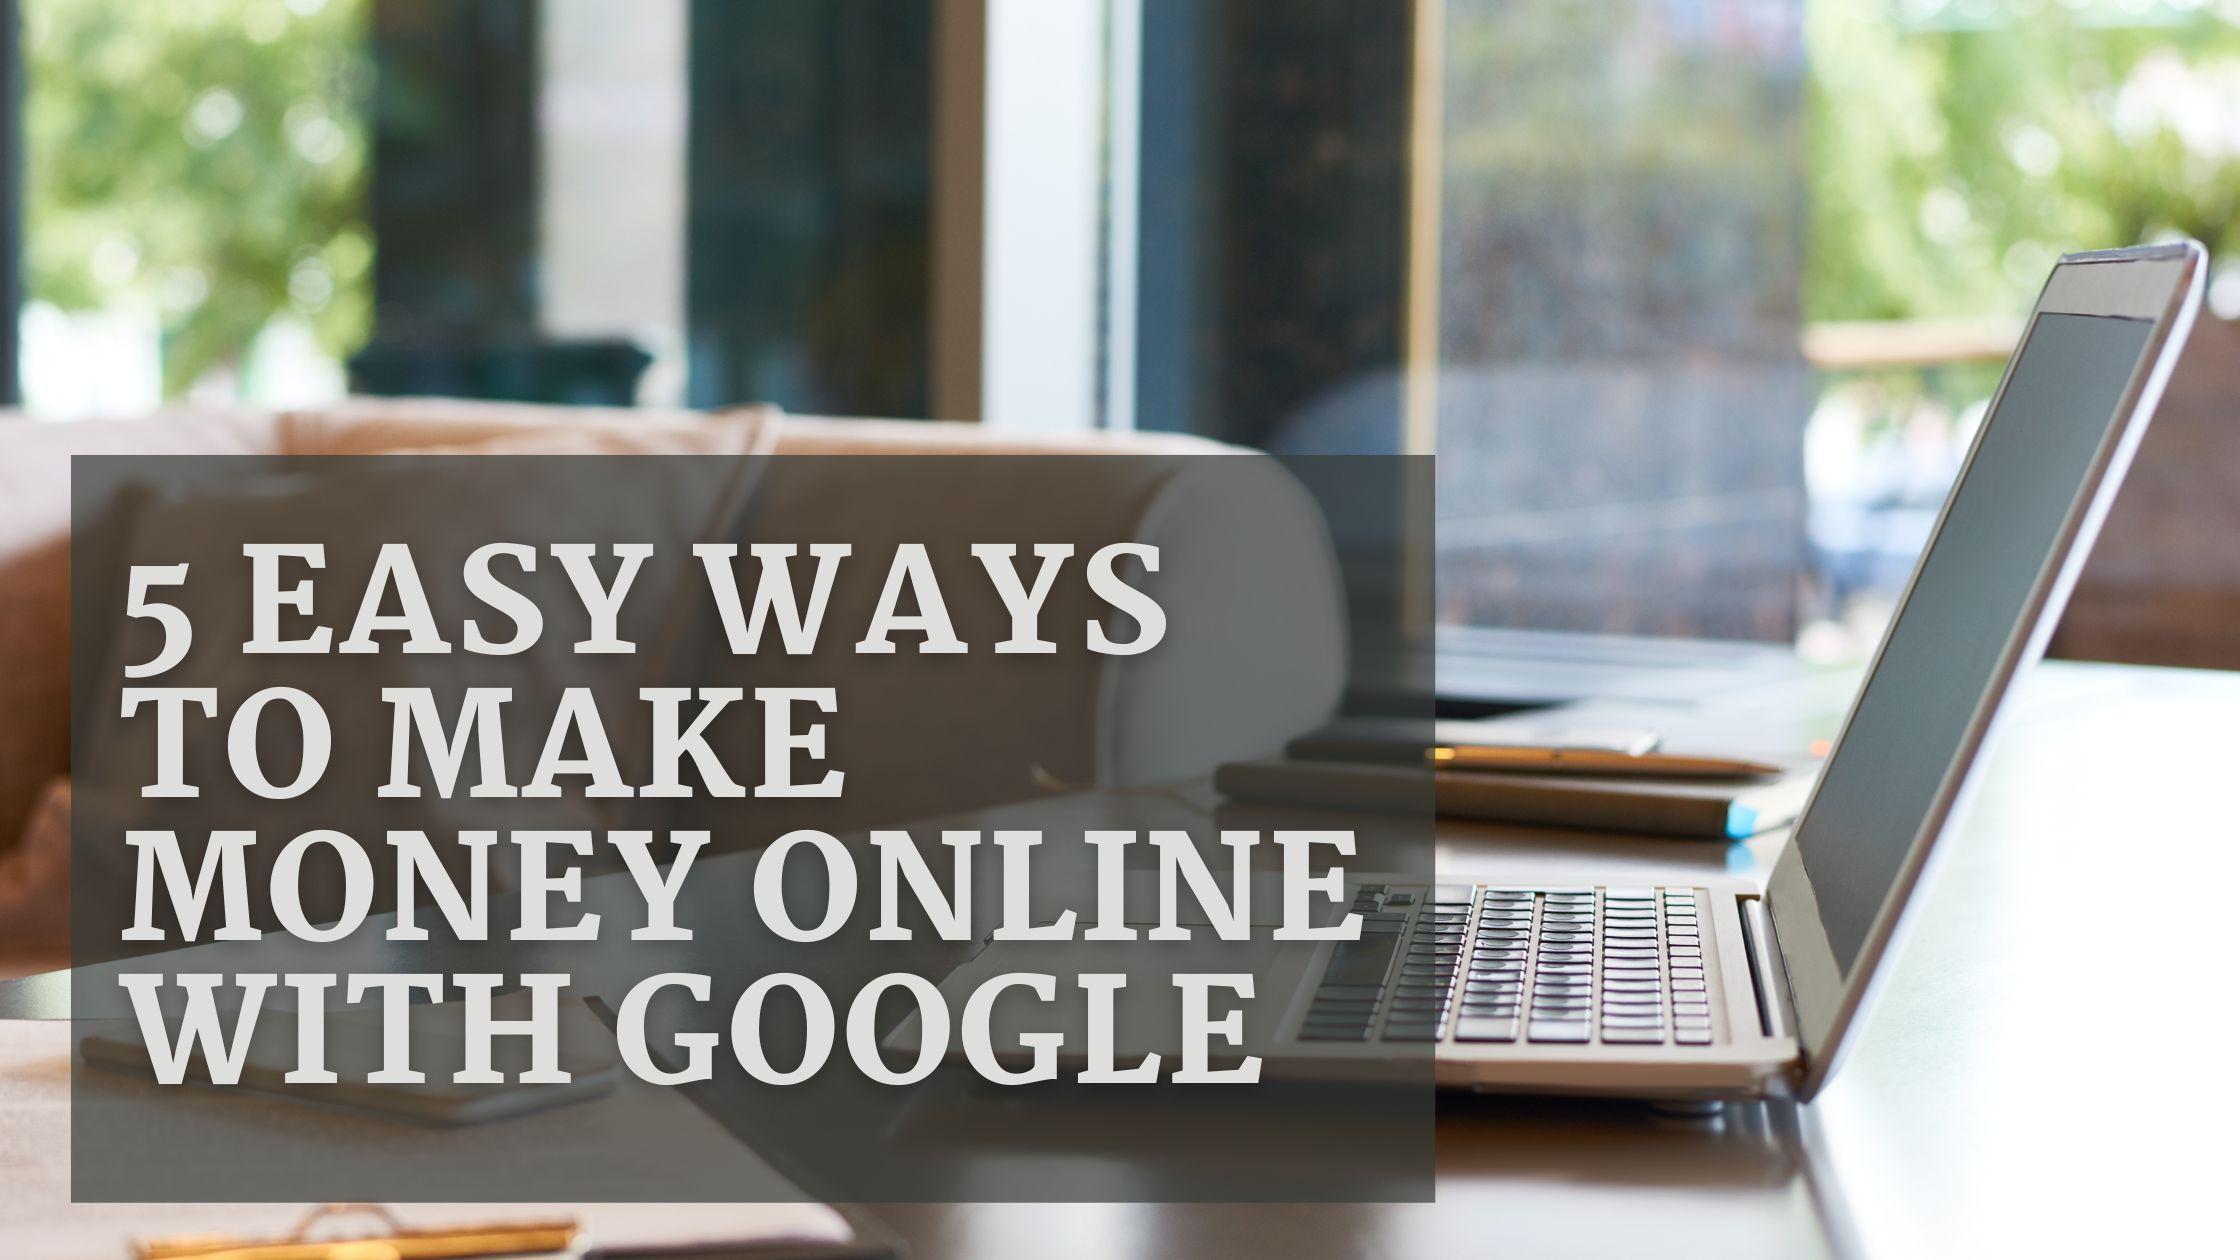 5 Easy Ways to Make Money Online With Google